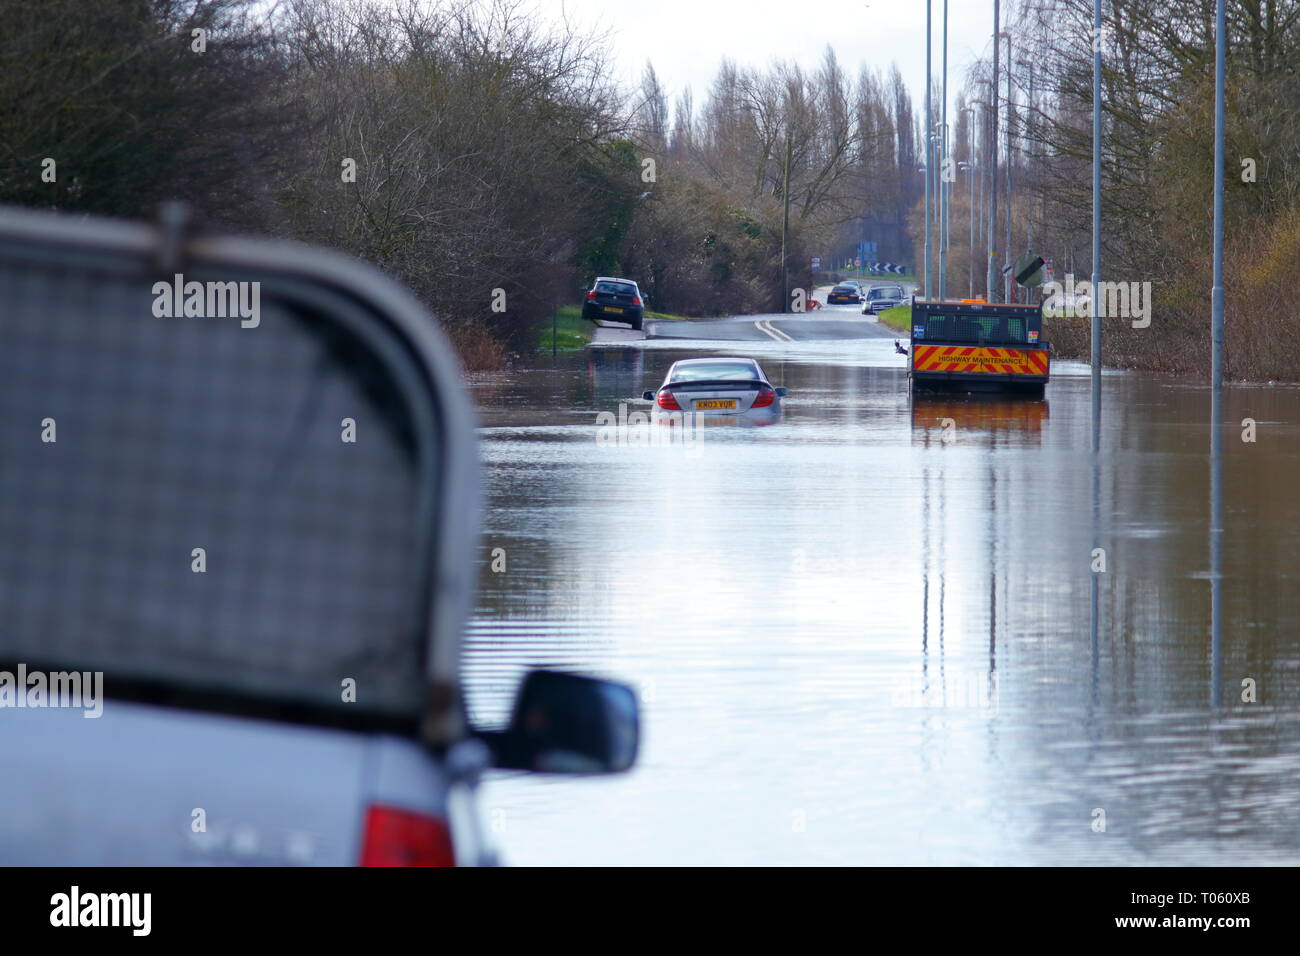 Castleford, UK. 17th March 2019.  Motorists abandon vehicles after getting stuck in flood water, between Castleford & Allerton Bywater. Credit Yorkshire Pics/Alamy Live News Stock Photo